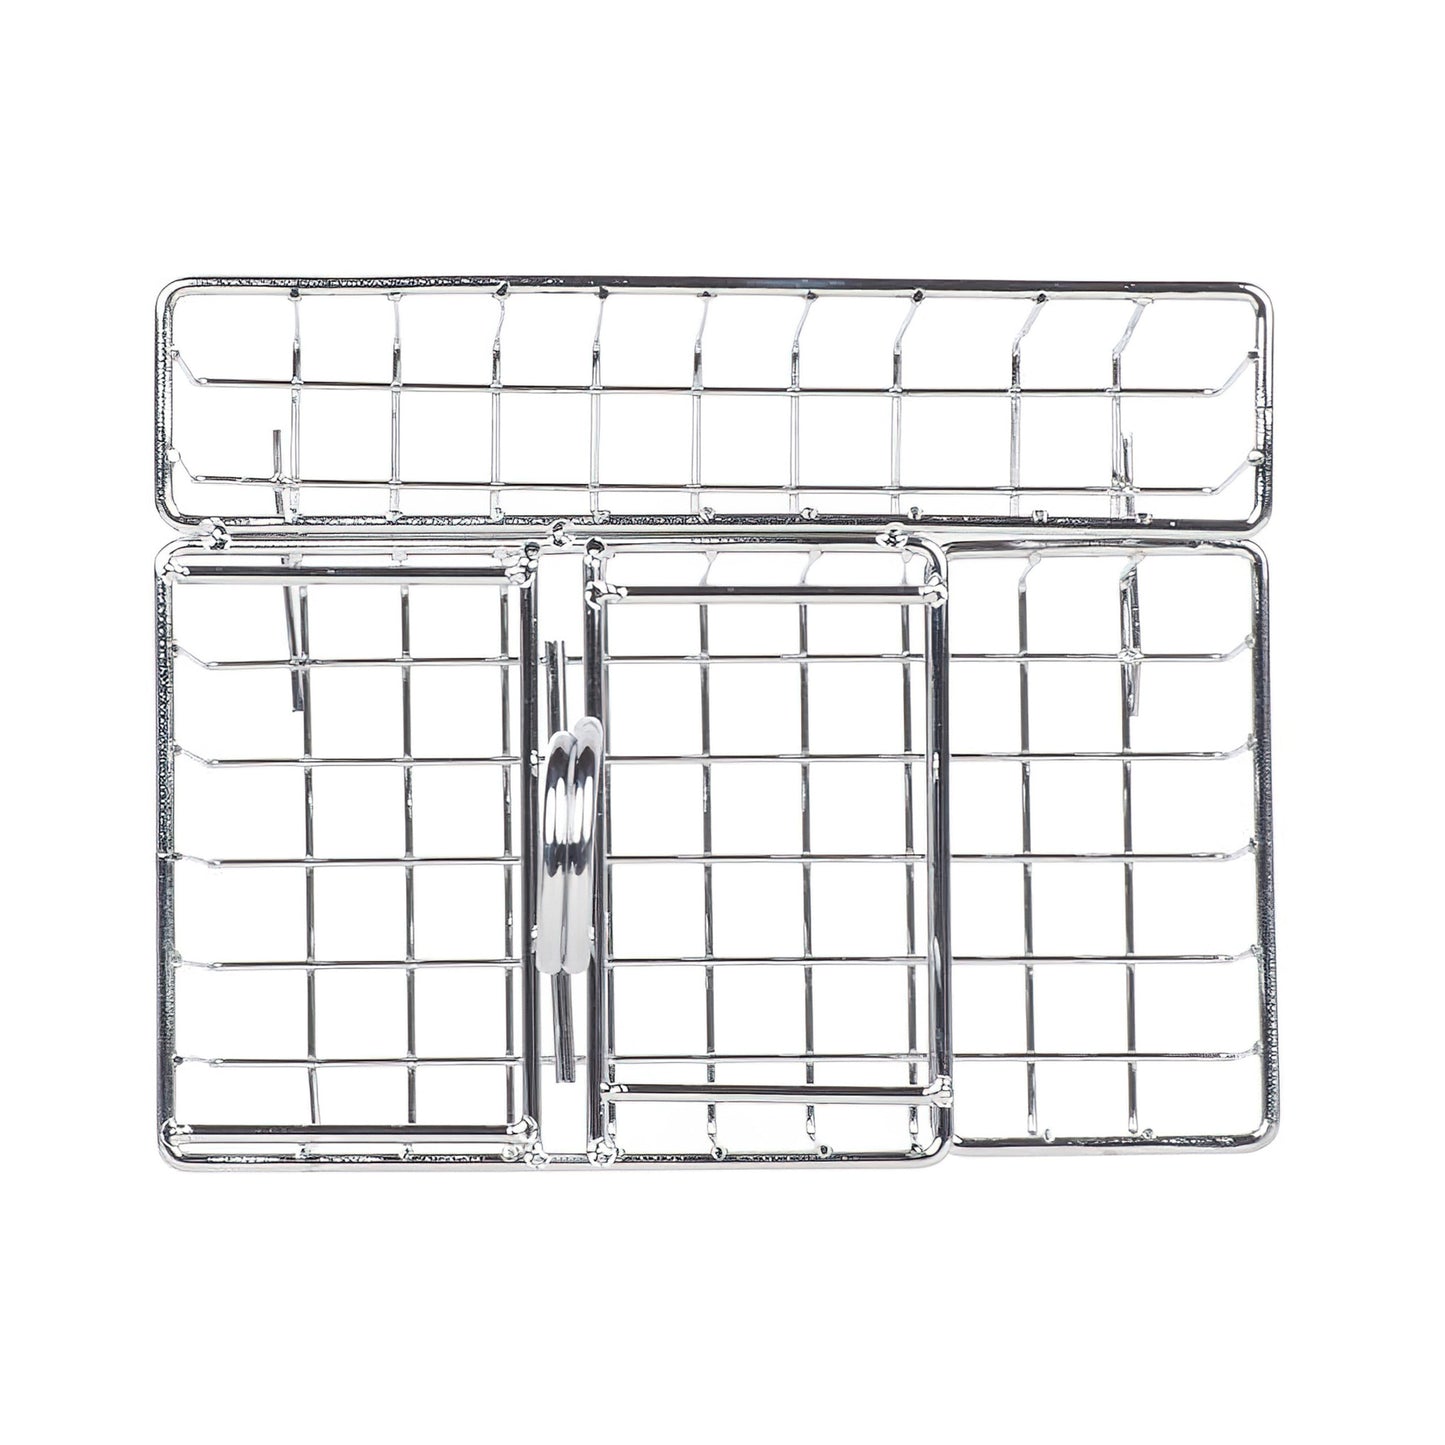 8" x 6.5" 4-Compartment Caddy, 9" Tall